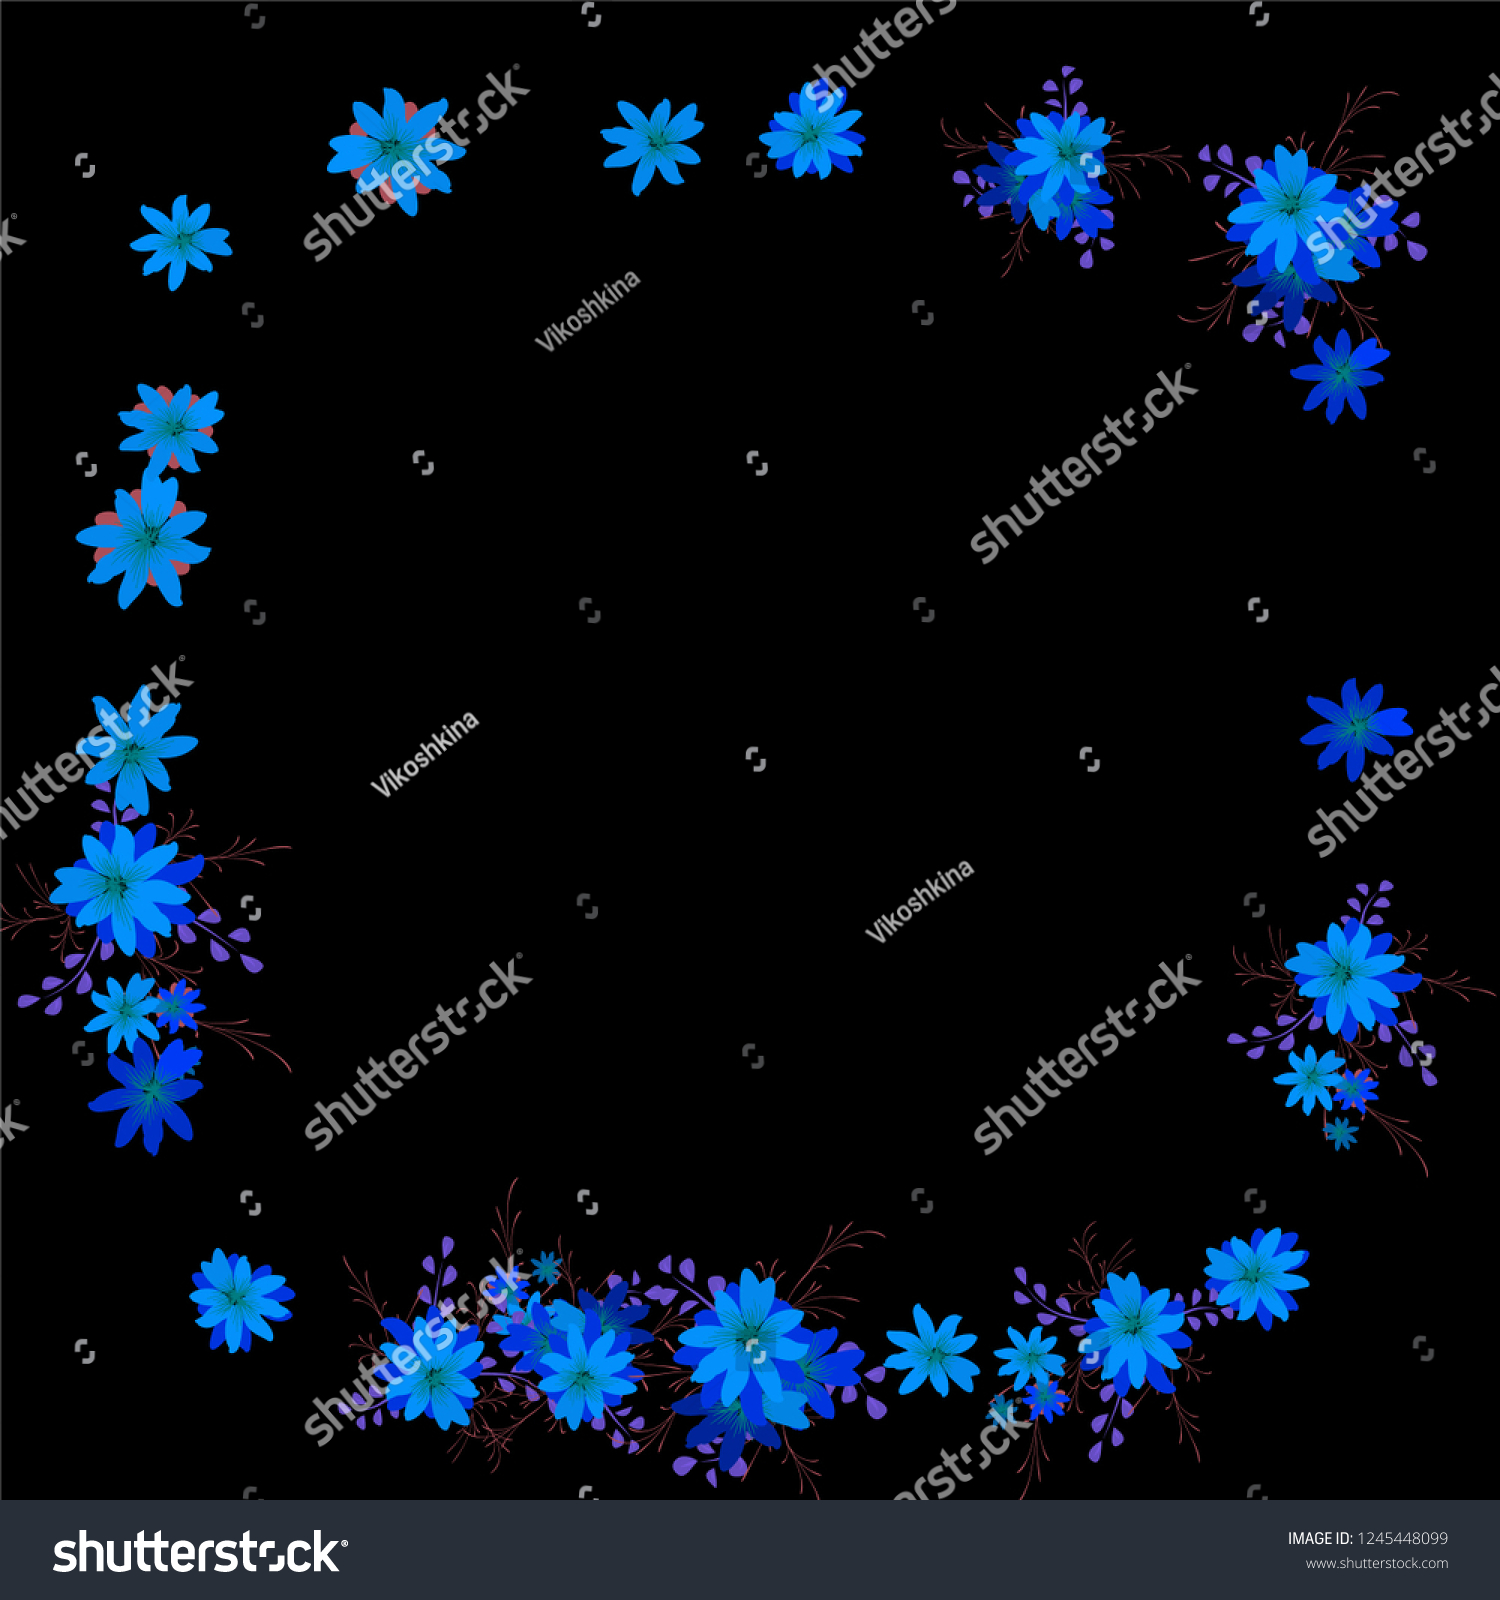 Floral Frame. Vector Square Pattern with Small Wild Flowers for Print, Brochure, Poster. Floral Decoration for Wedding or Birthday Invitation. Colorful Design on Black Background. #1245448099